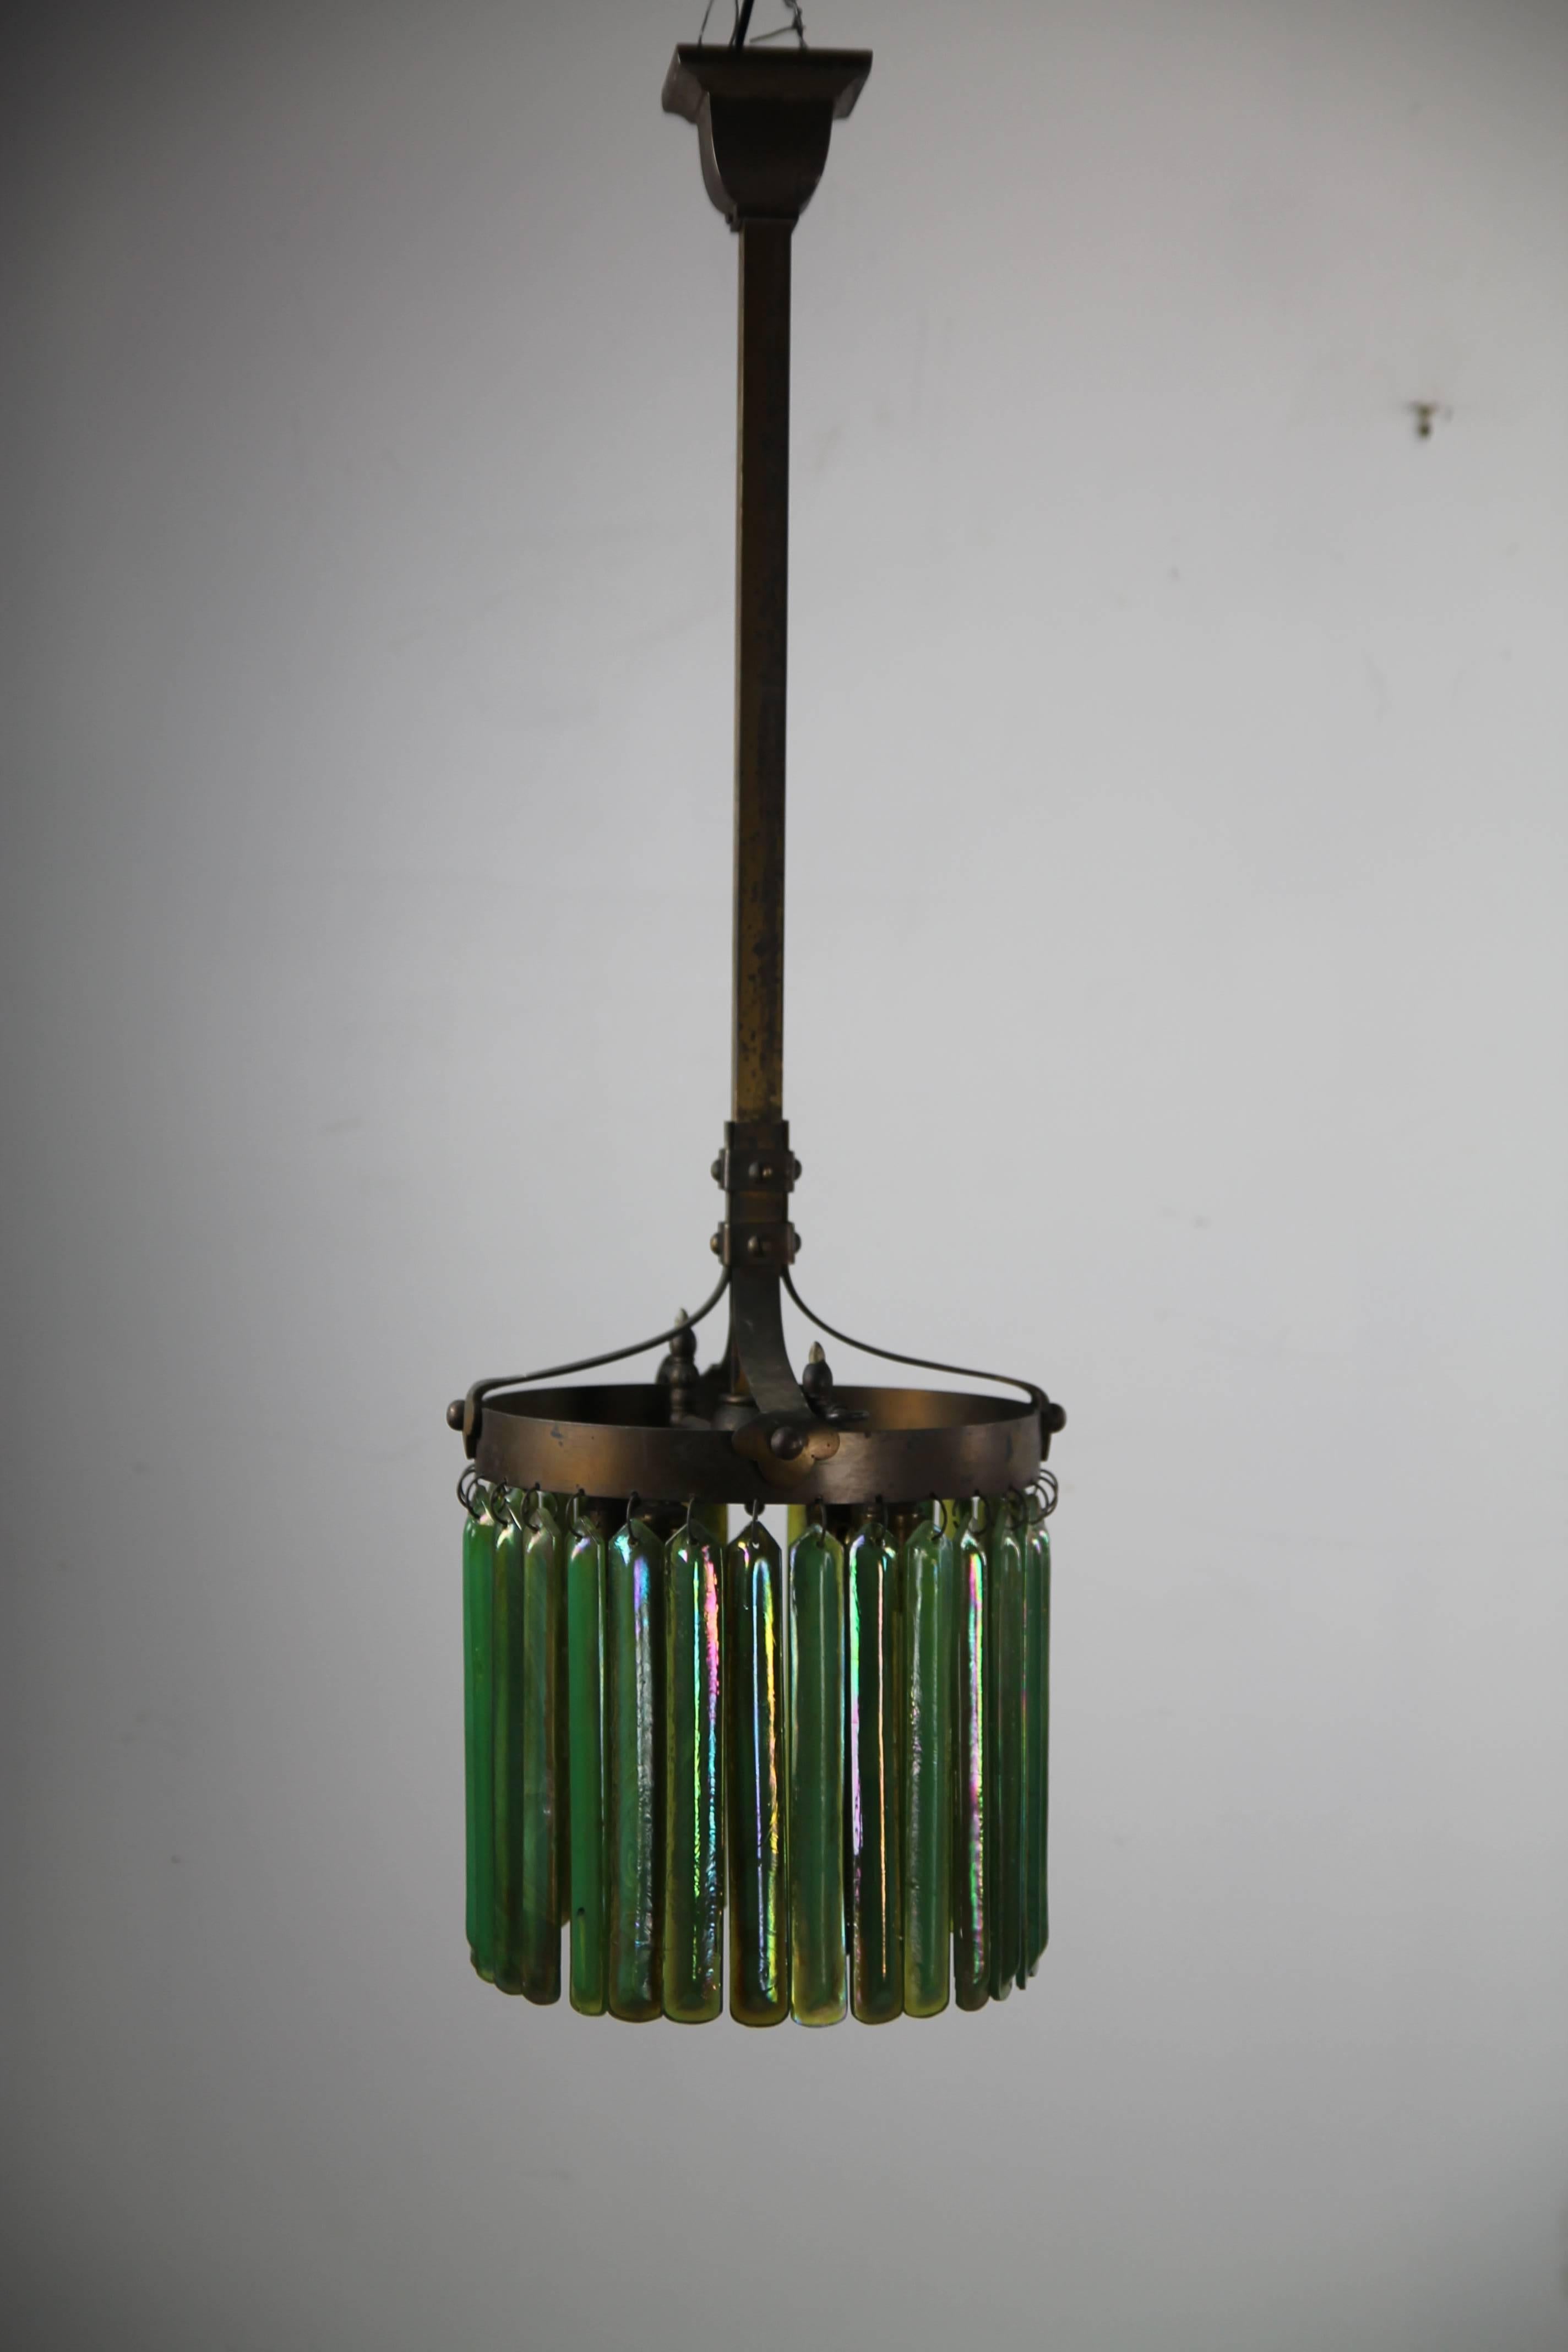 Wonderful Arts & Crafts period hanging light with 30 10 inch (rare) Tiffany Prisims, started its first life as a gas fixture which dates it circa 1895. Later it was converted to electric. This light came from a house in CT that had been decorated